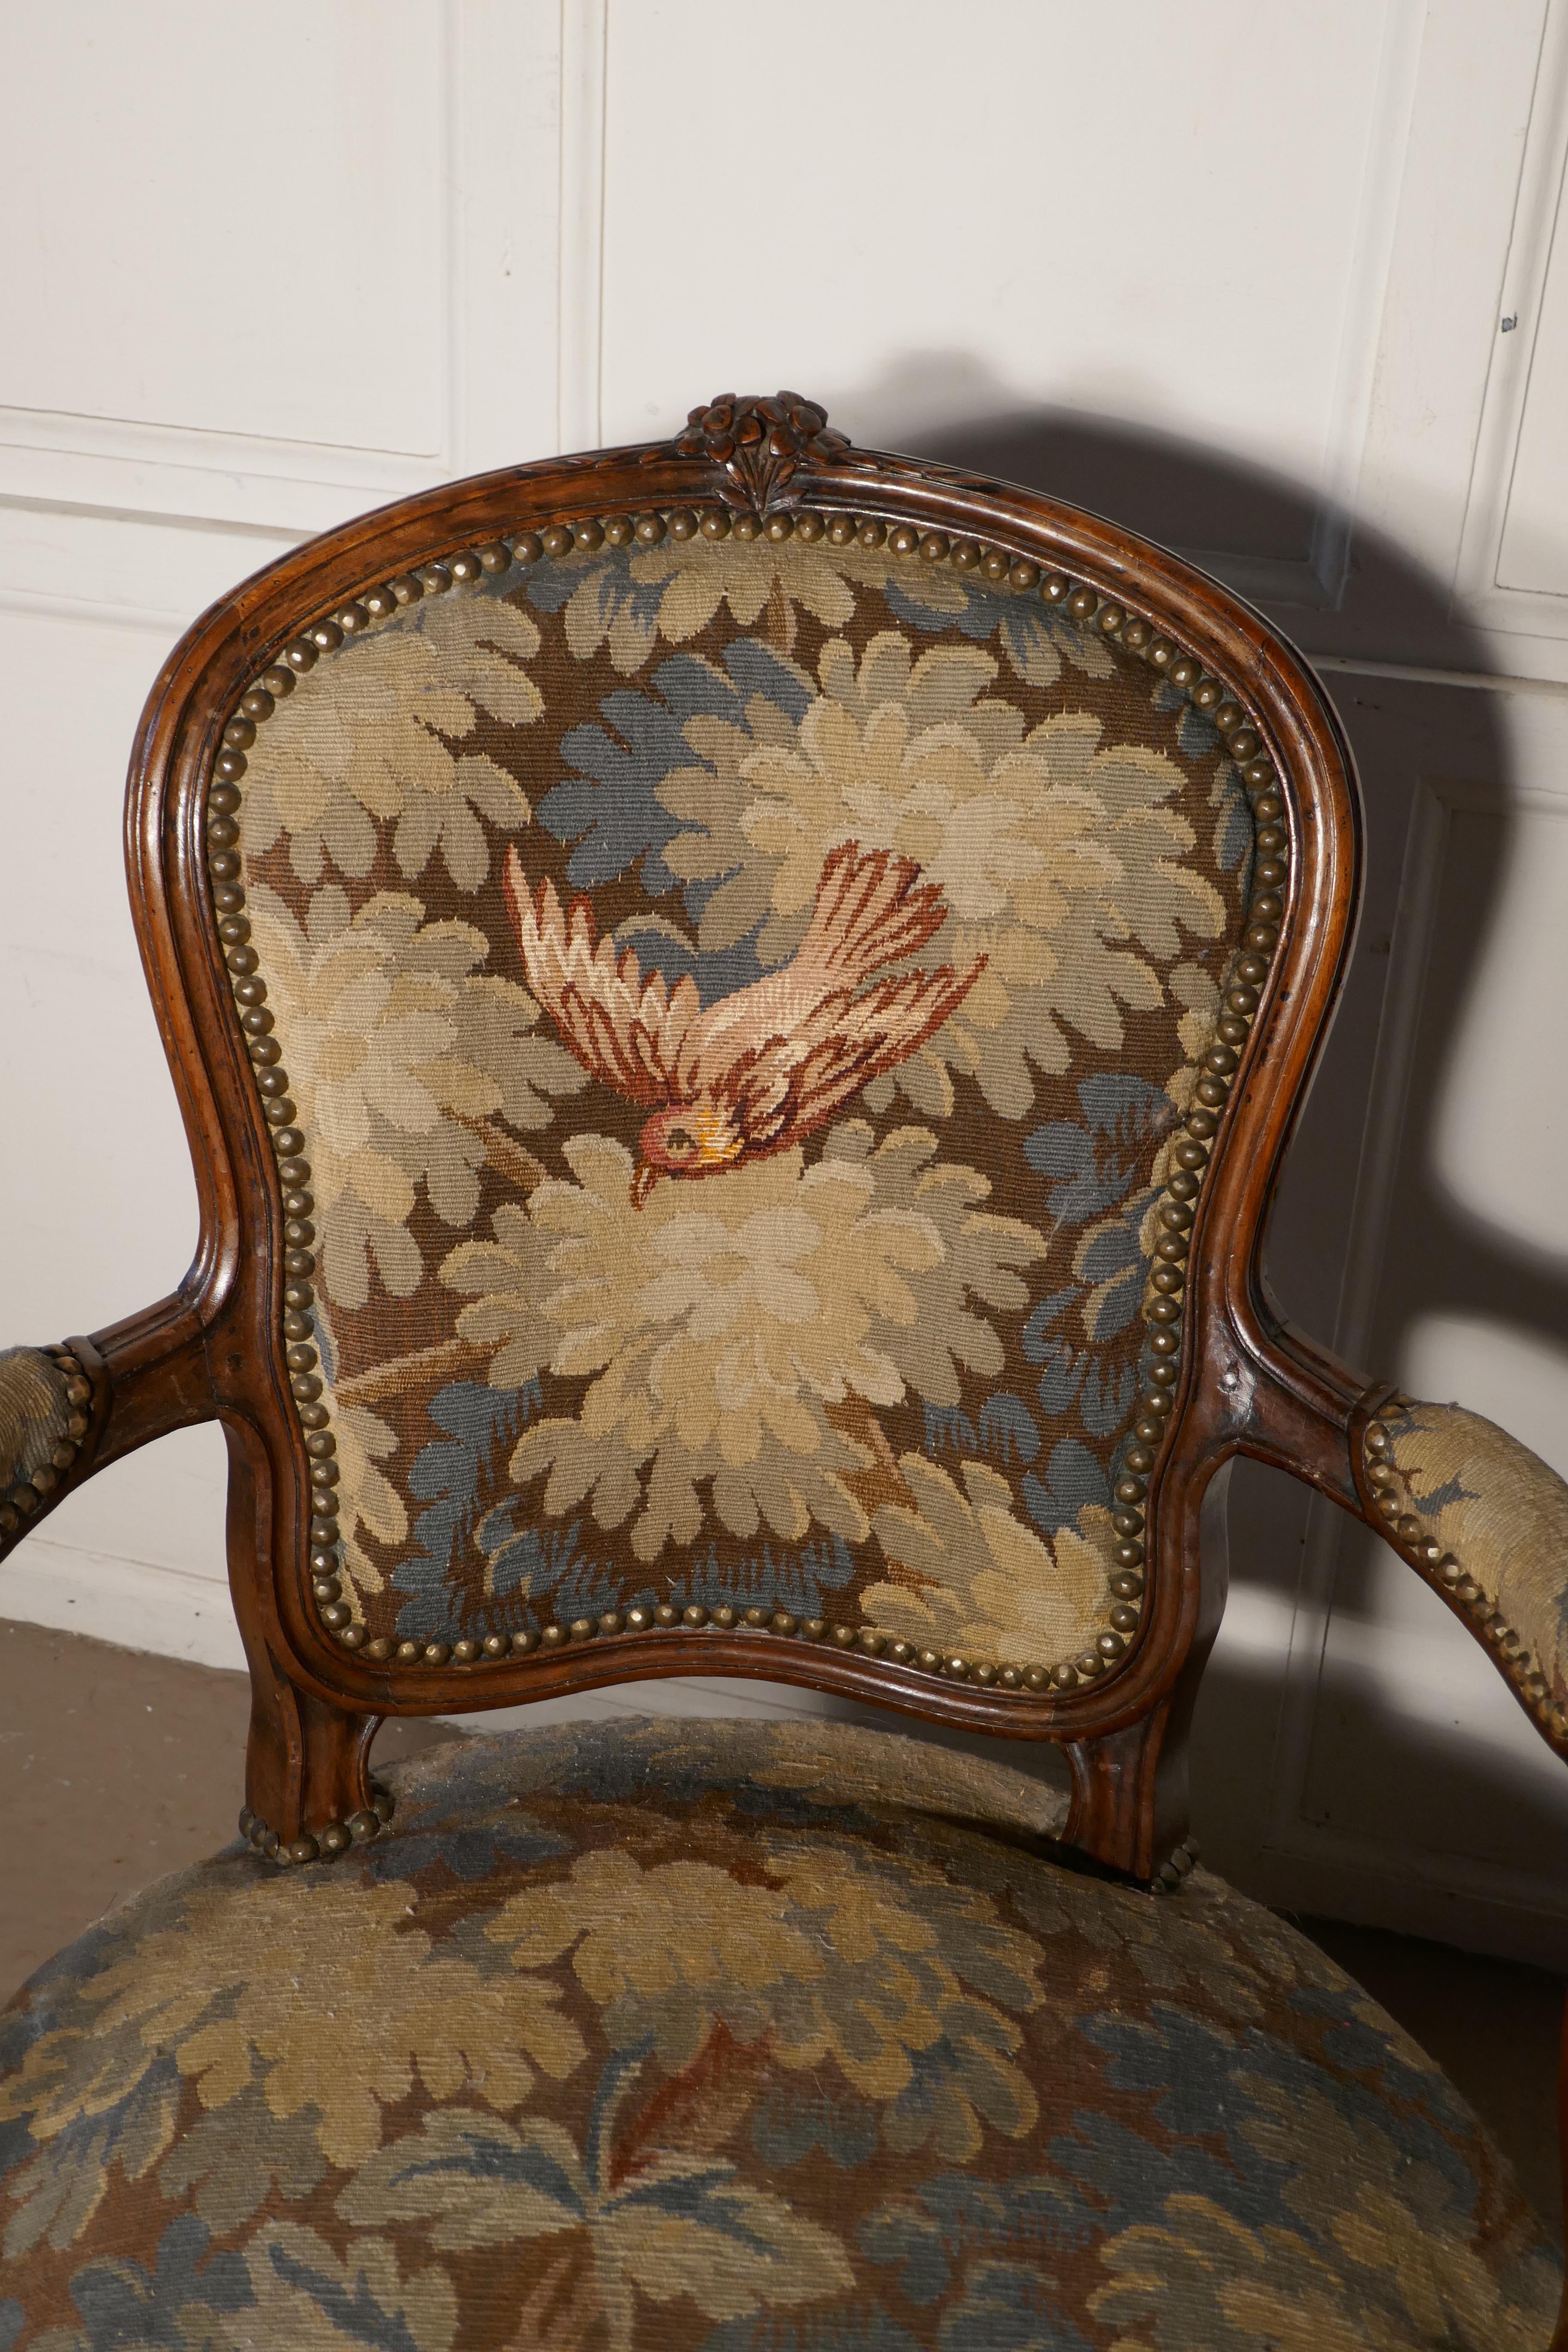 A pair of French Arts & Crafts salon library chairs 

These beautiful chairs come with their original individual handwoven linen upholstery, they date back to circa 1880, and showing only slight signs of wear
The fabric has beautifully muted